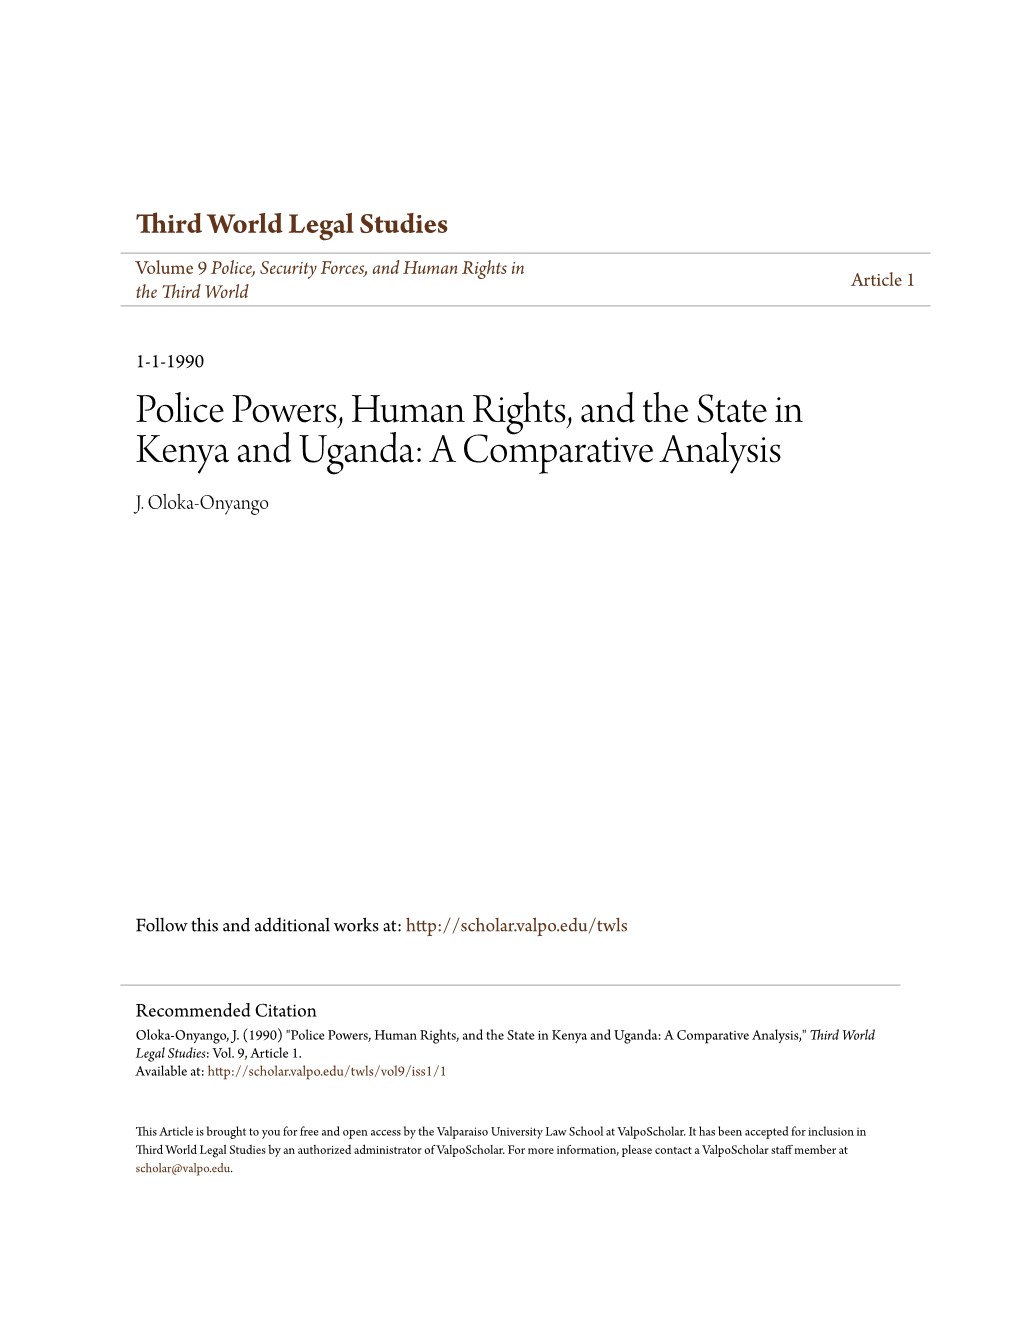 Police Powers, Human Rights, and the State in Kenya and Uganda: a Comparative Analysis J